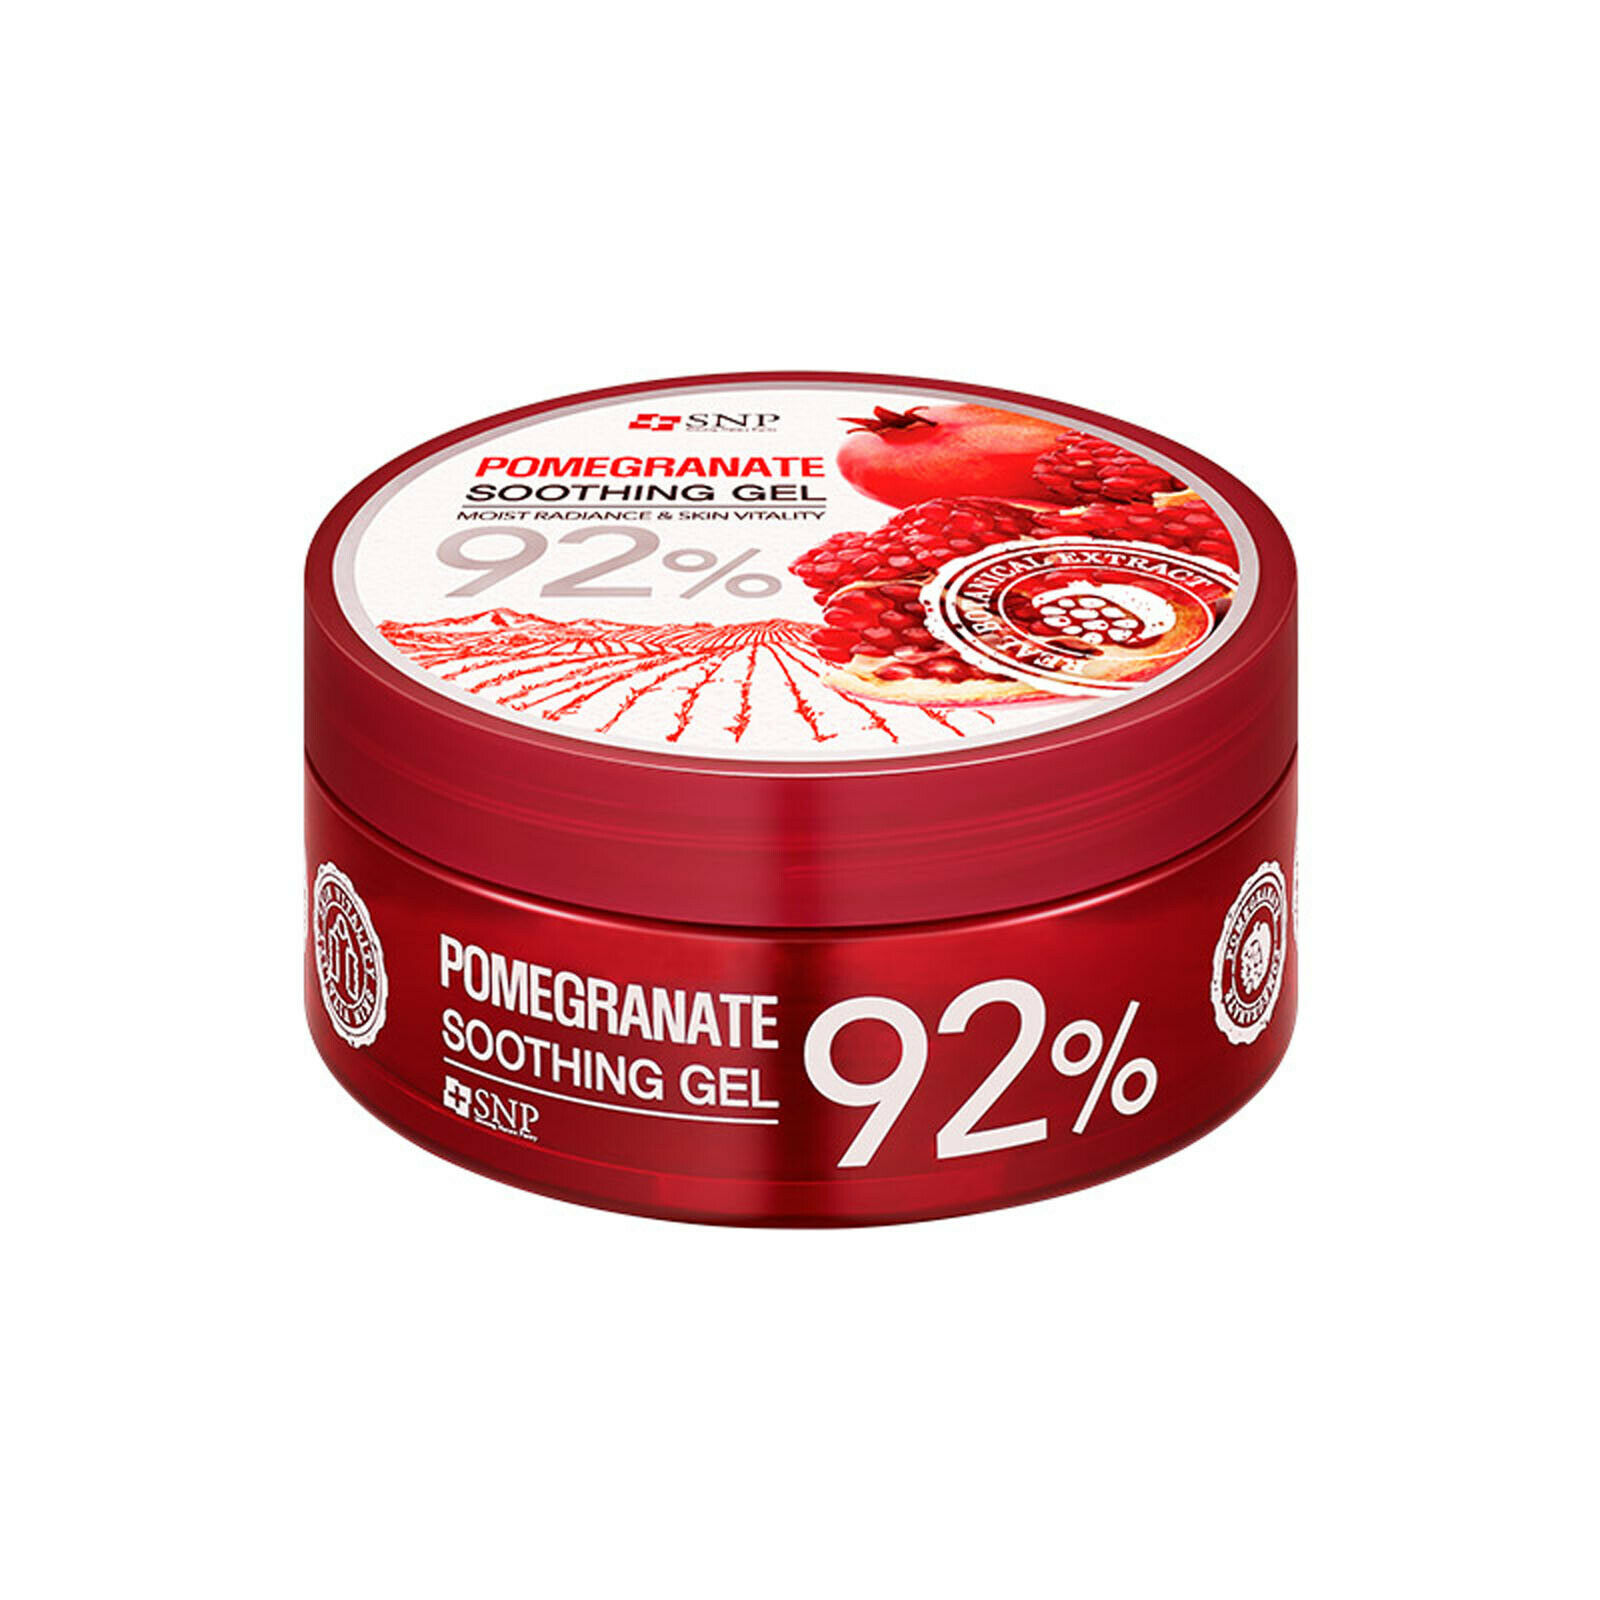 SNP 92% Pomegranate Soothing Gel